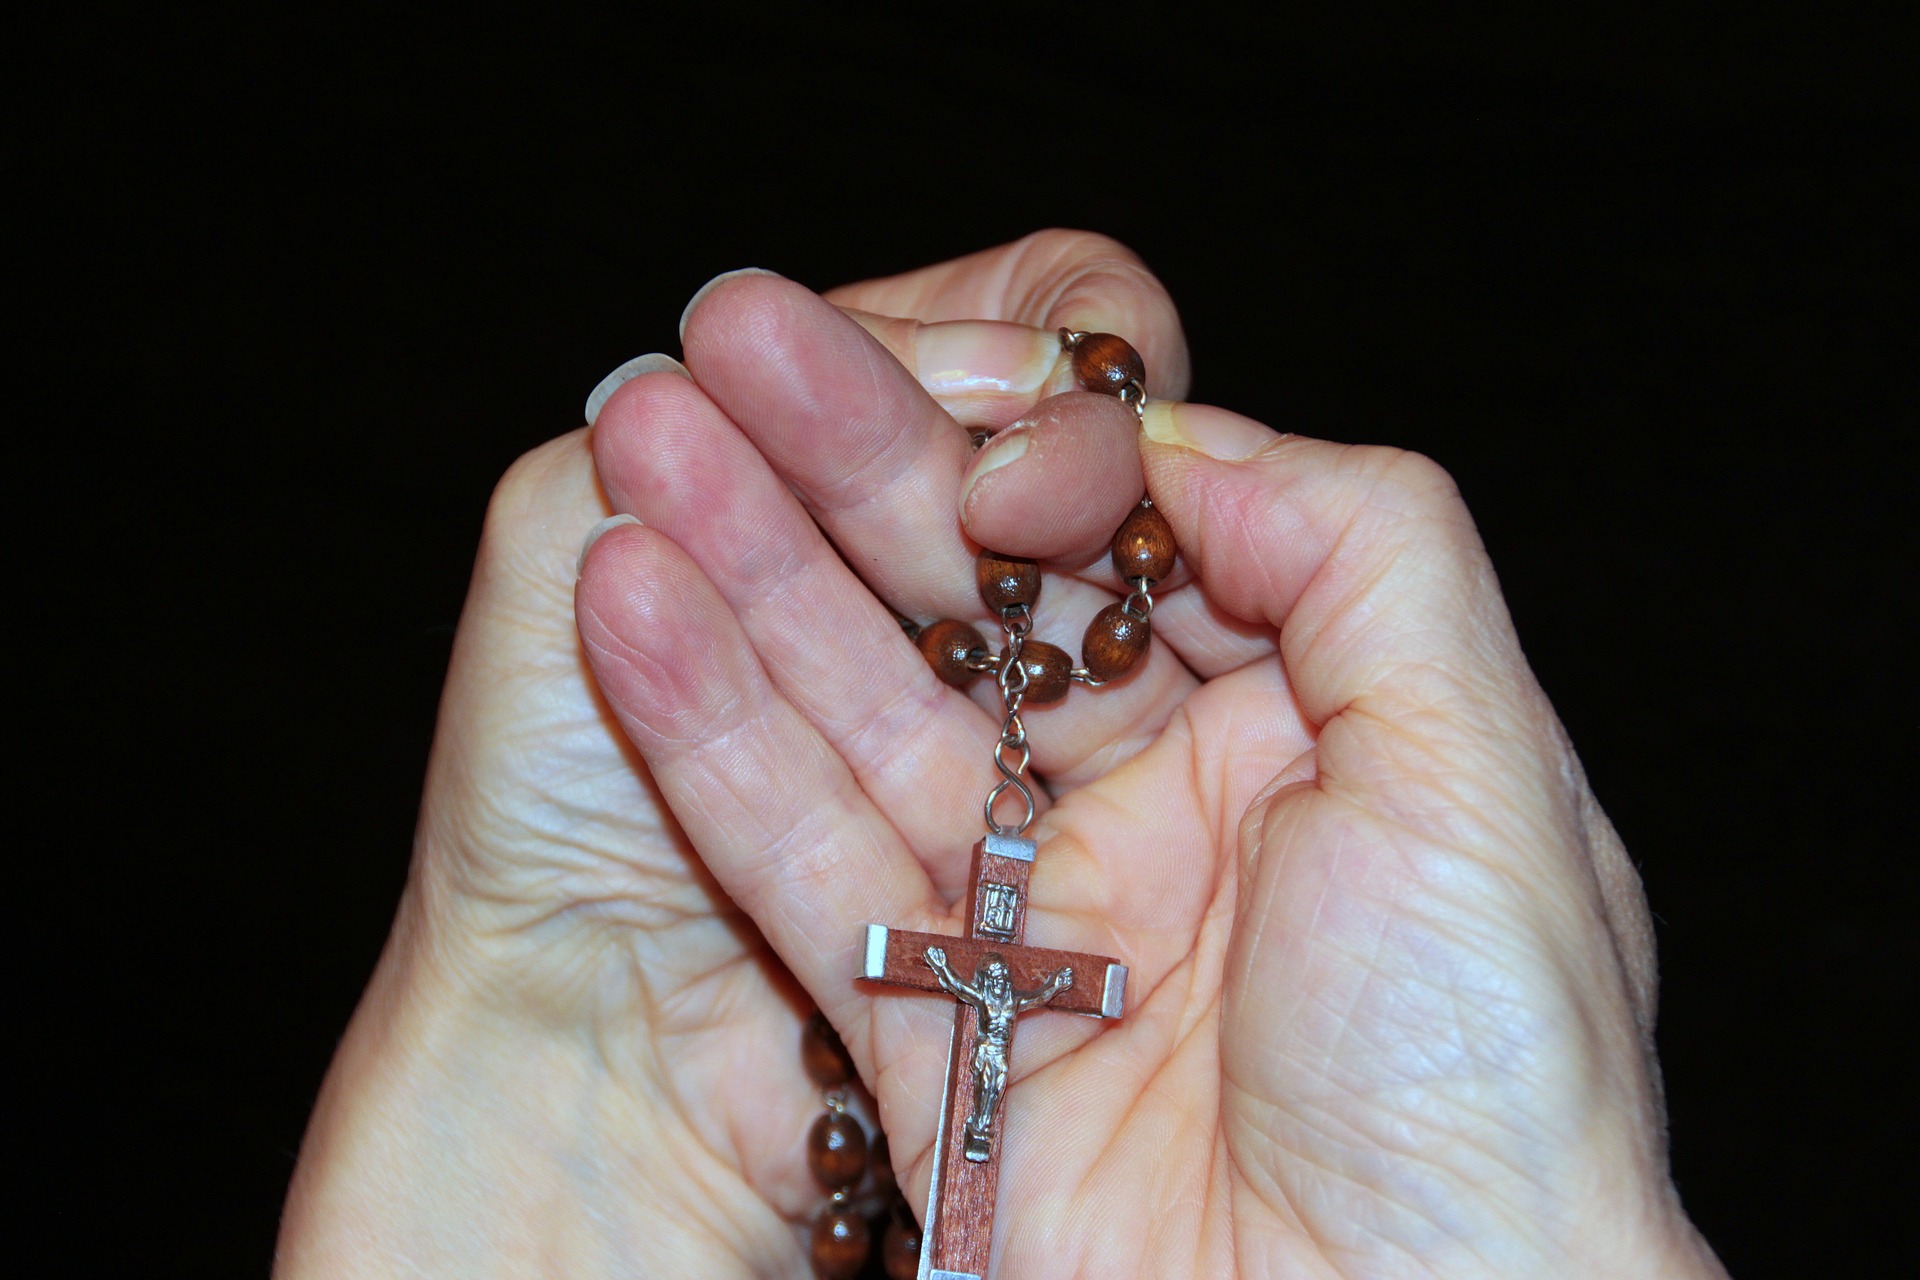 Holding a cross on string of beads photo